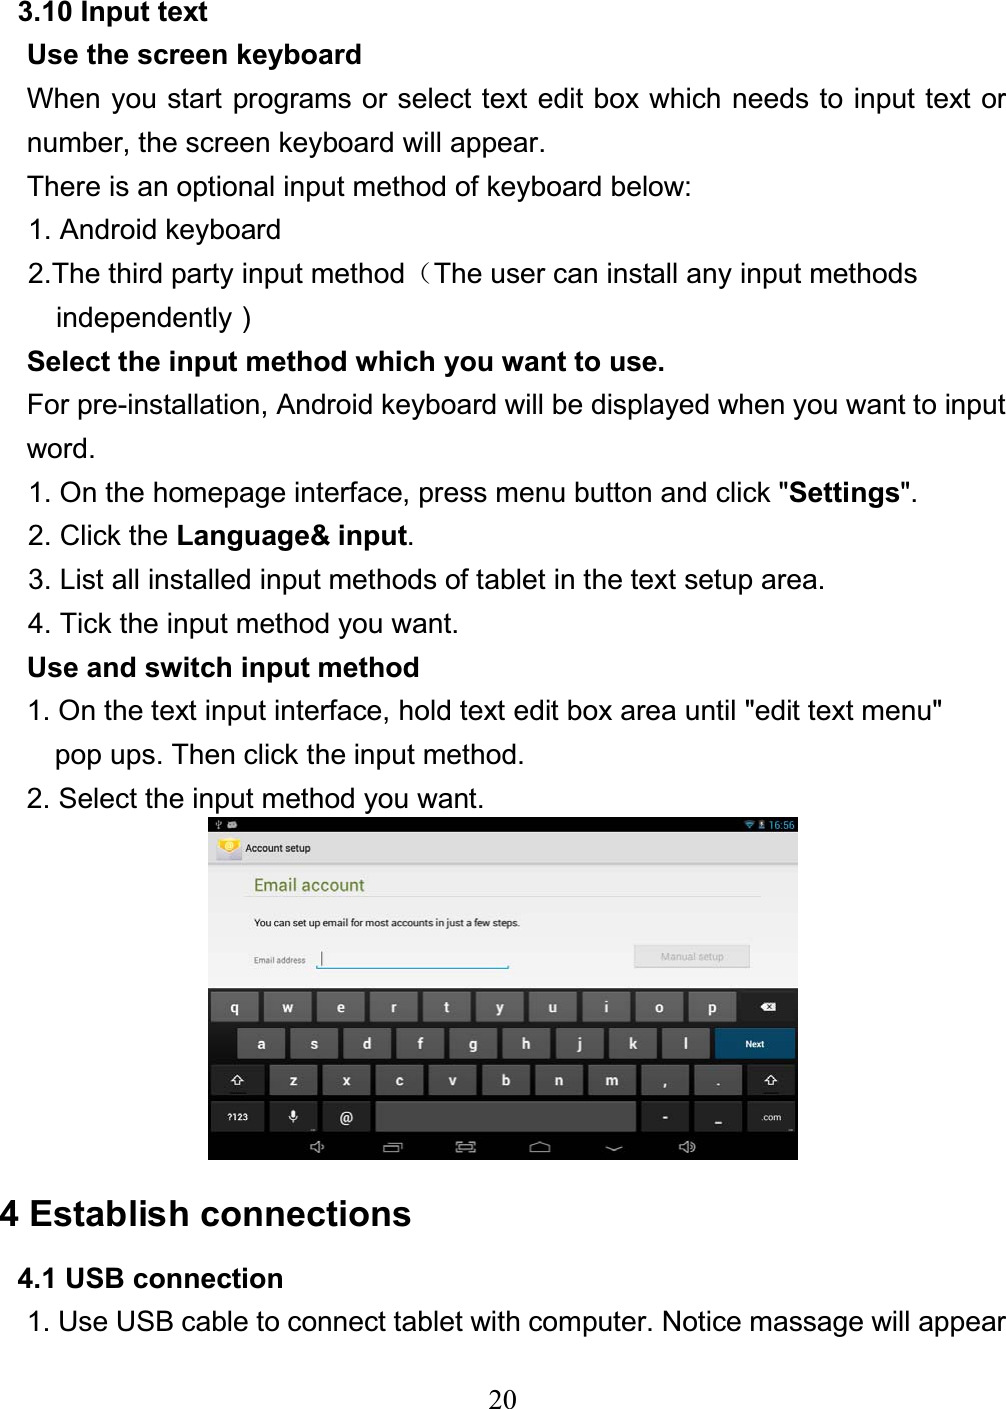 203.10 Input text Use the screen keyboard When you start programs or select text edit box which needs to input text or number, the screen keyboard will appear. There is an optional input method of keyboard below: 1. Android keyboard 2.The third party input method˄The user can install any input methods   independently᧥Select the input method which you want to use. For pre-installation, Android keyboard will be displayed when you want to input word. 1. On the homepage interface, press menu button and click &quot;Settings&quot;. 2. Click the Language&amp; input.3. List all installed input methods of tablet in the text setup area. 4. Tick the input method you want. Use and switch input method 1. On the text input interface, hold text edit box area until &quot;edit text menu&quot;   pop ups. Then click the input method. 2. Select the input method you want. 4 Establish connections 4.1 USB connection 1. Use USB cable to connect tablet with computer. Notice massage will appear 